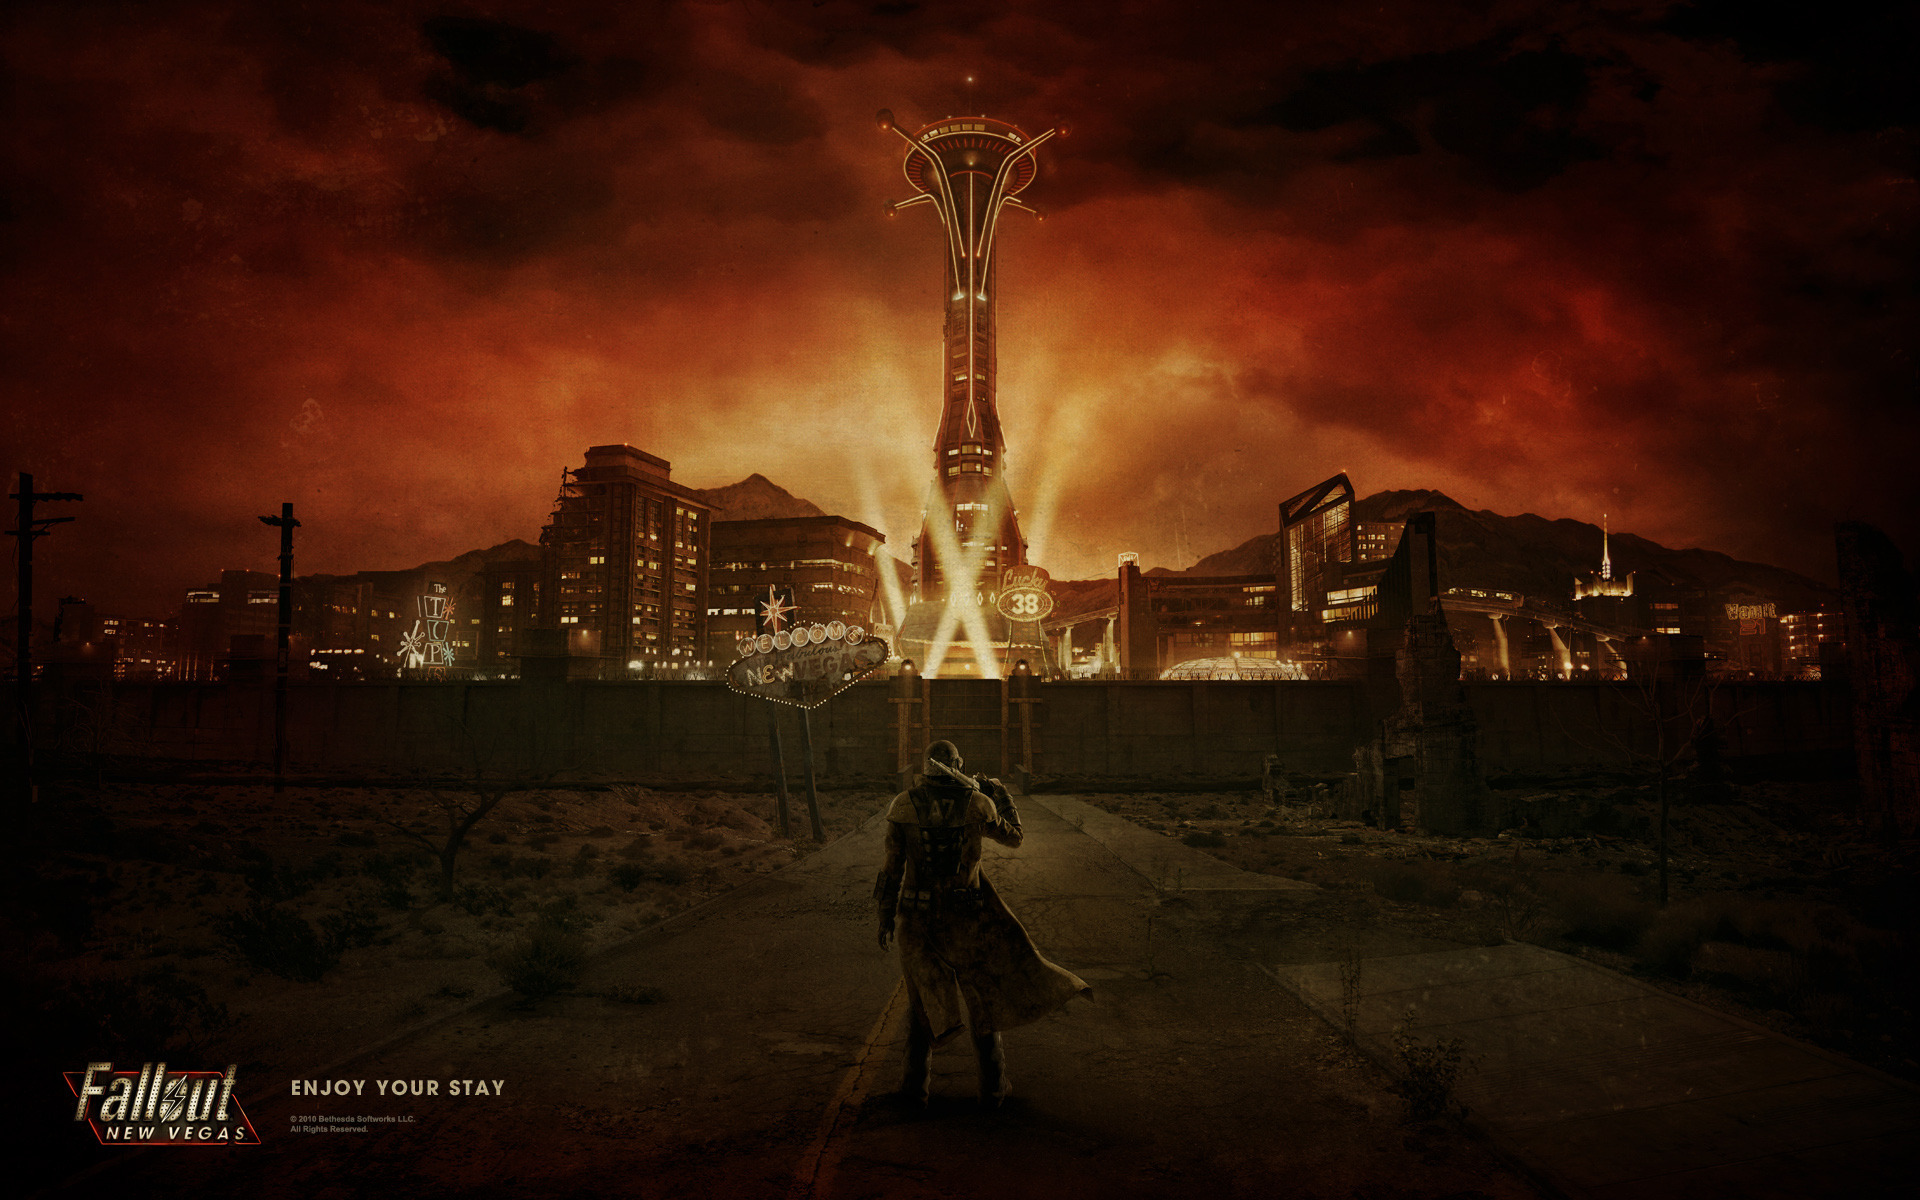 General 1920x1200 Fallout: New Vegas video games Fallout apocalyptic digital art science fiction 2010 (Year) Bethesda Softworks dark sky PC gaming